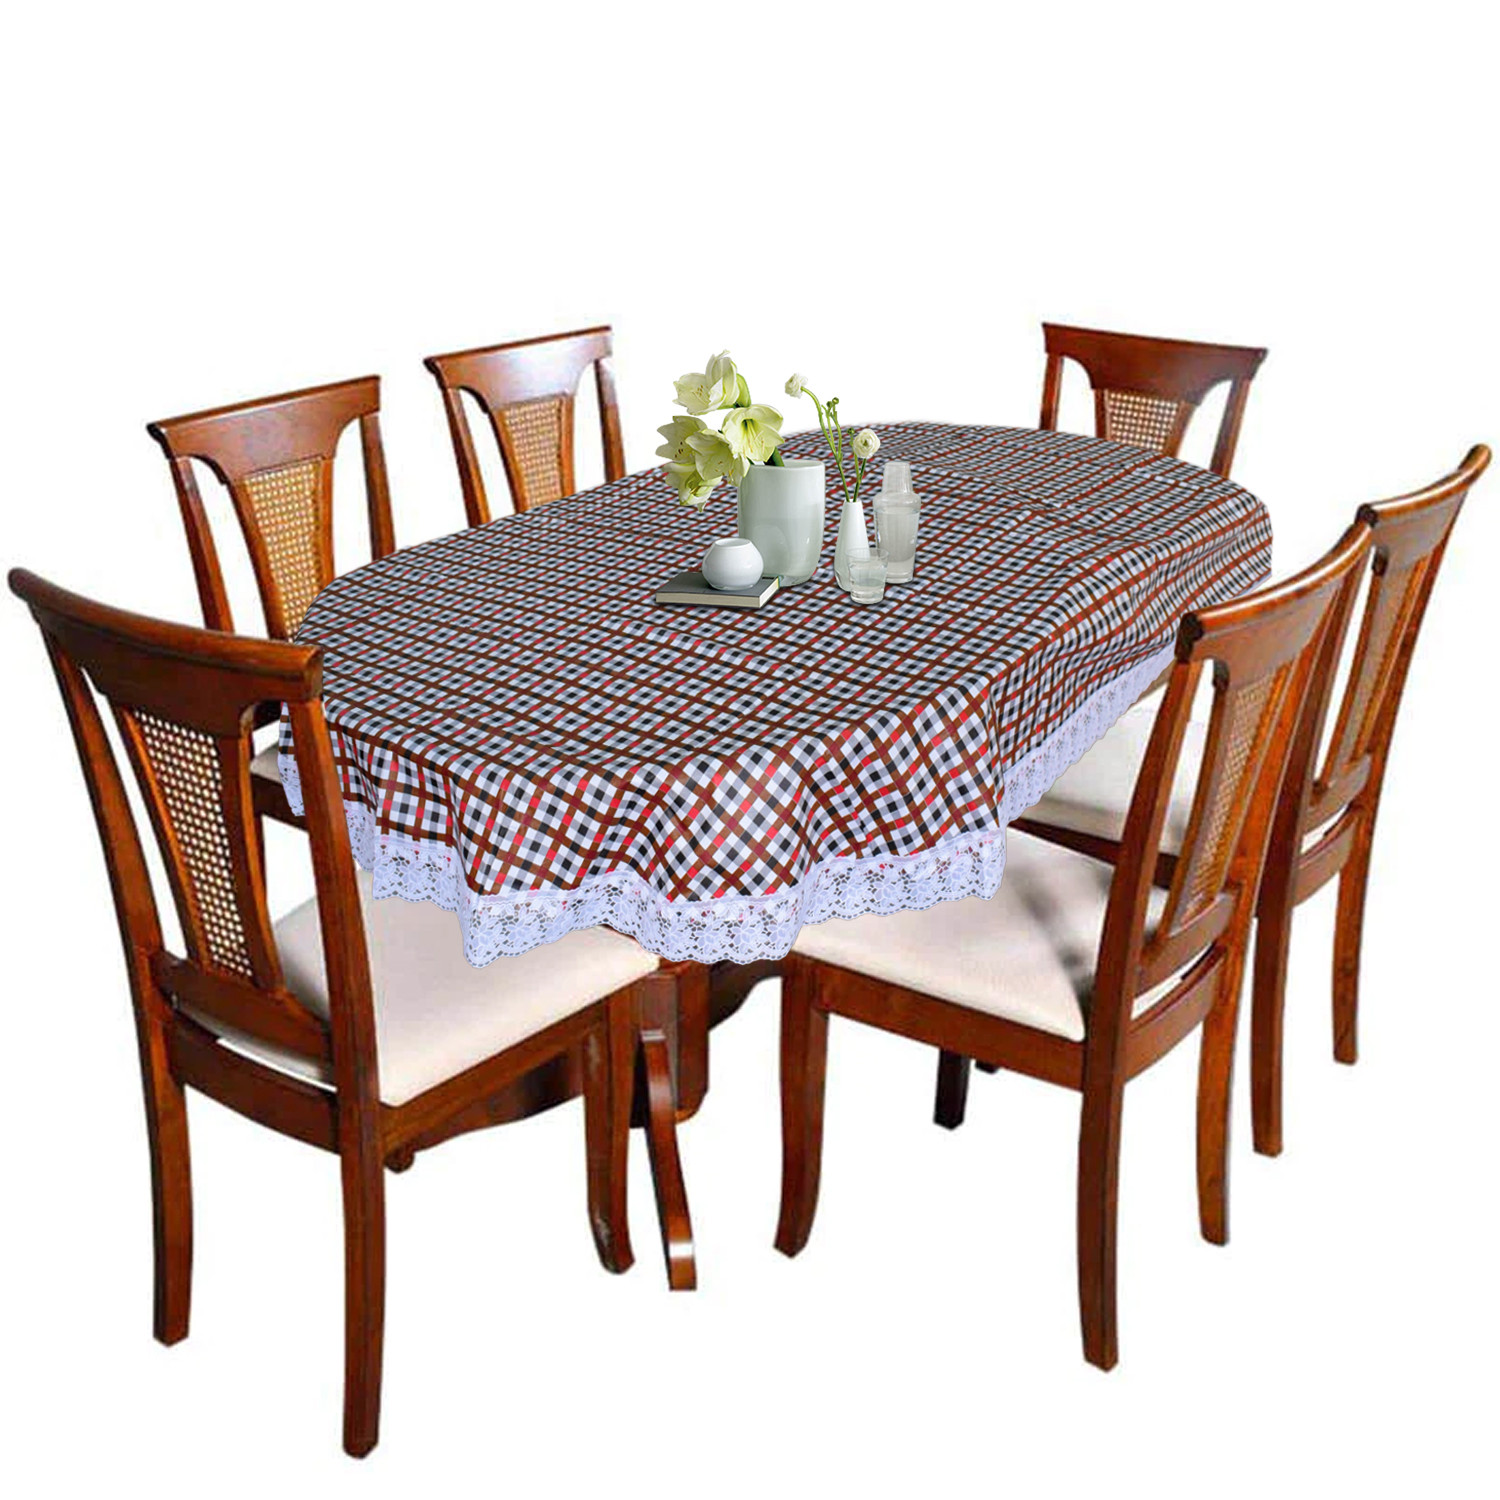 Kuber Industries Check Printed PVC 6 Seater Oval Shape Table Cover, Protector With White Lace Border, 60